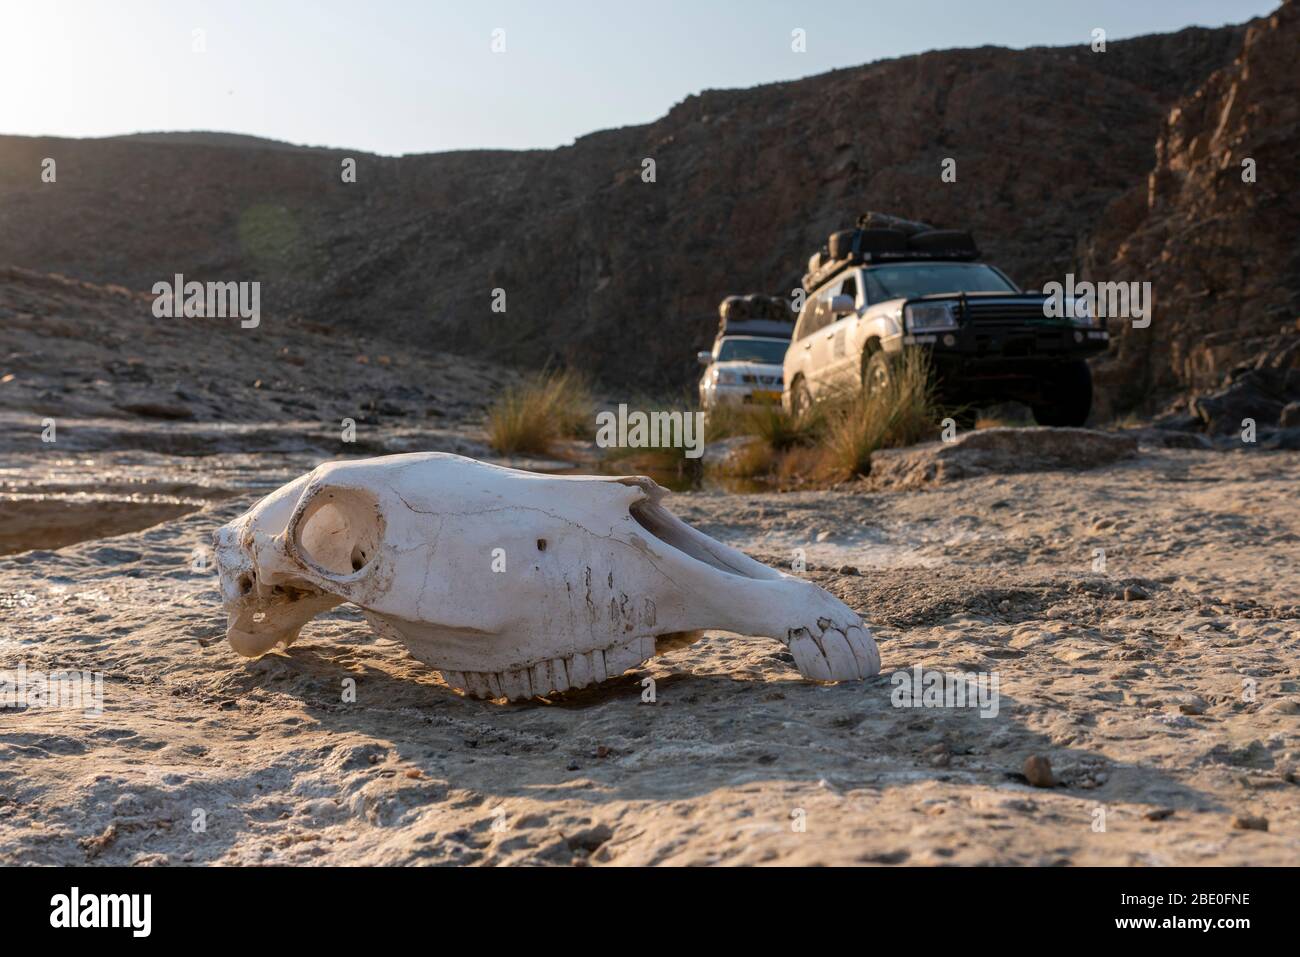 a herbivore skull rests on the rocky banks of a river in a canyon Stock Photo